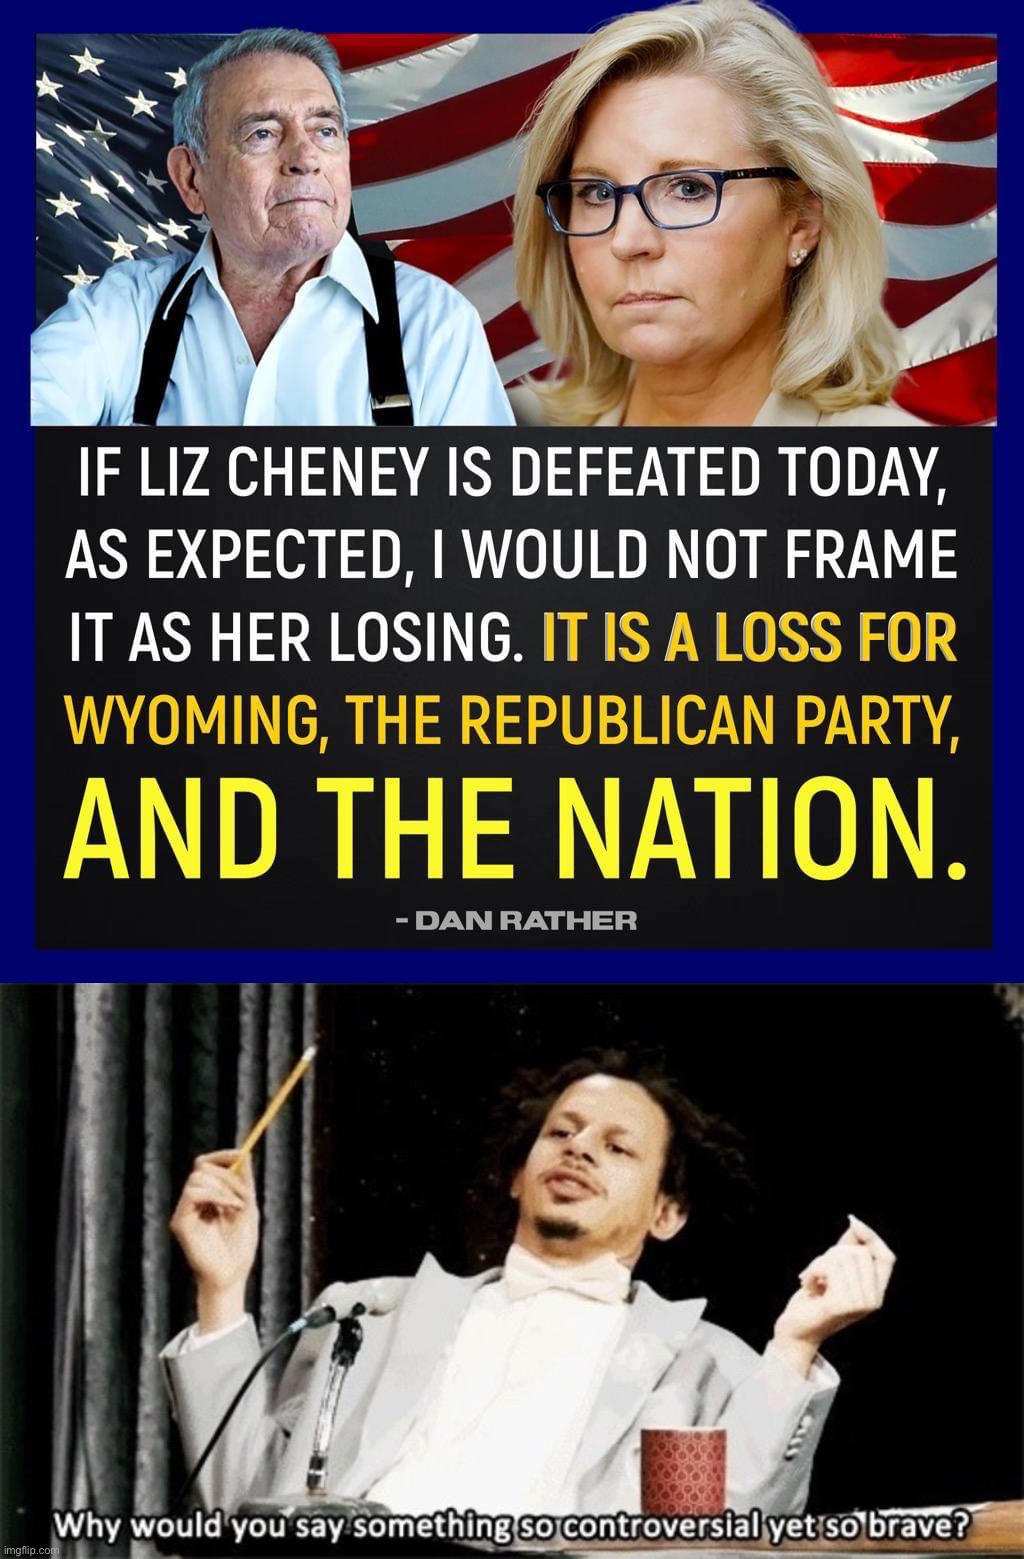 Dan Rather says it all. | image tagged in if liz cheney is defeated,why would you say something so controversial yet so brave,liz cheney,republicans,gop,republican party | made w/ Imgflip meme maker